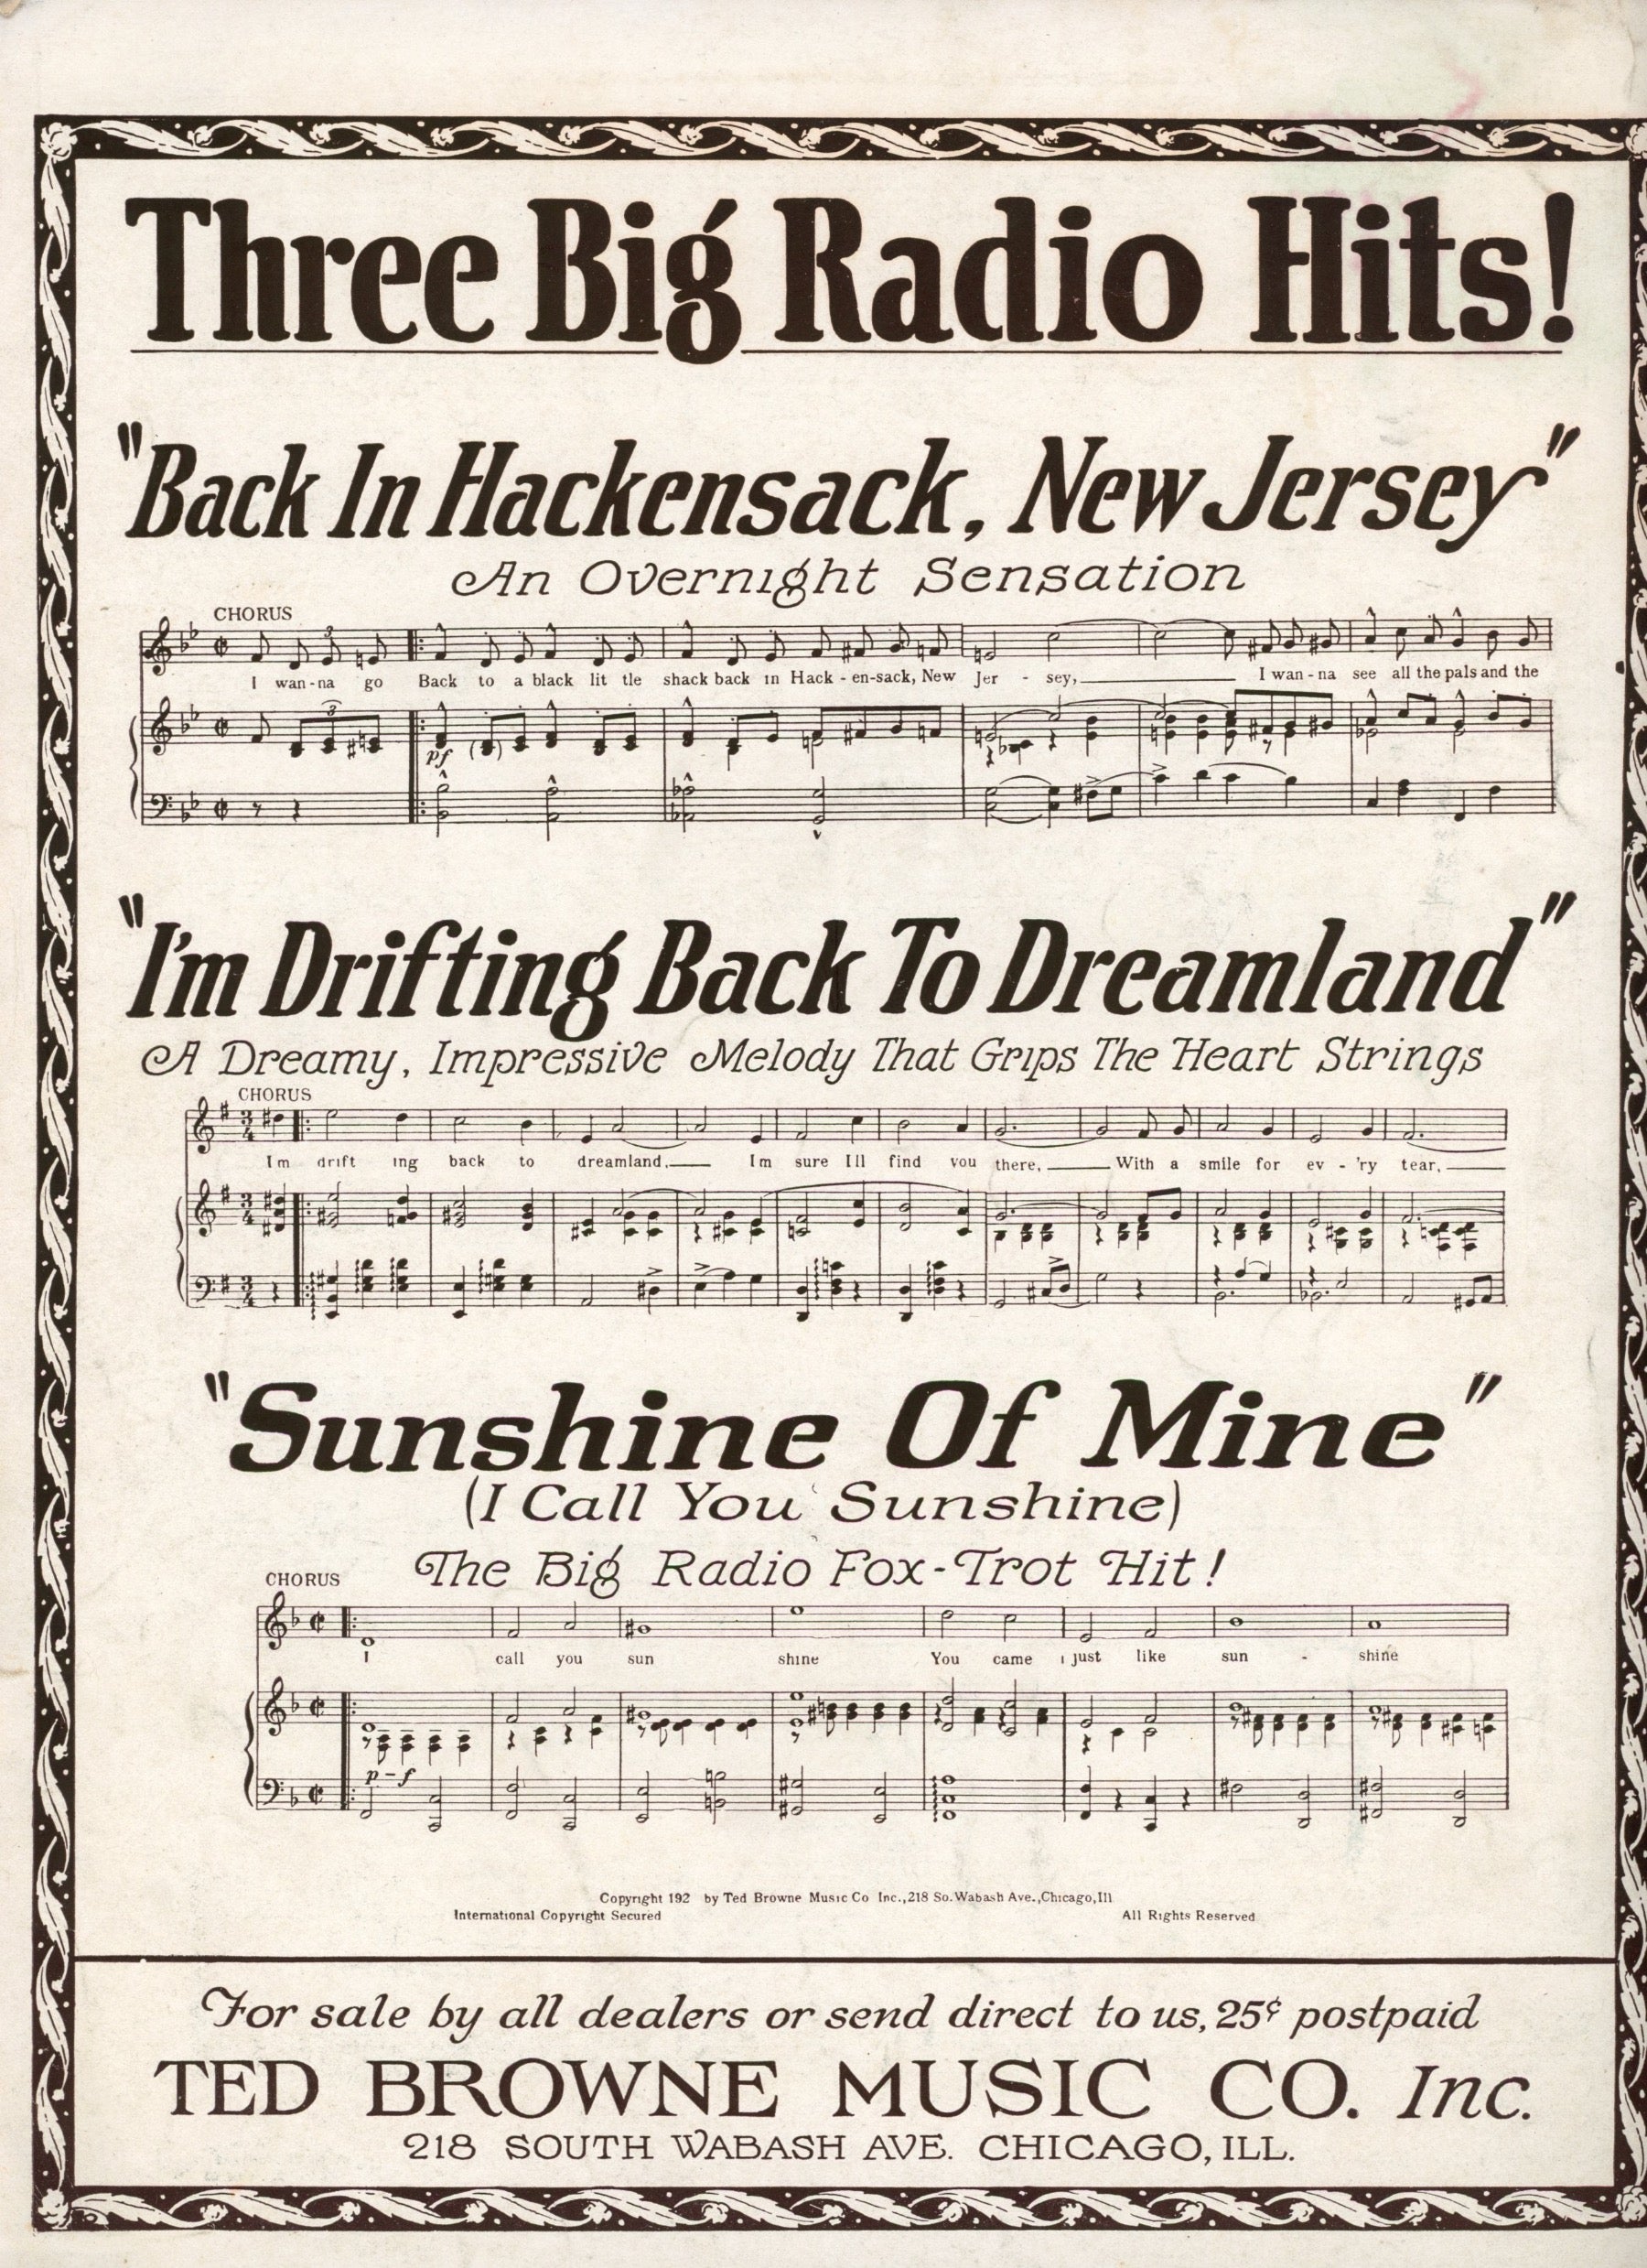 SWEETEST LITTLE ROSE in Tennessee: A Lullaby by s Vintage Sheet Music ©1924